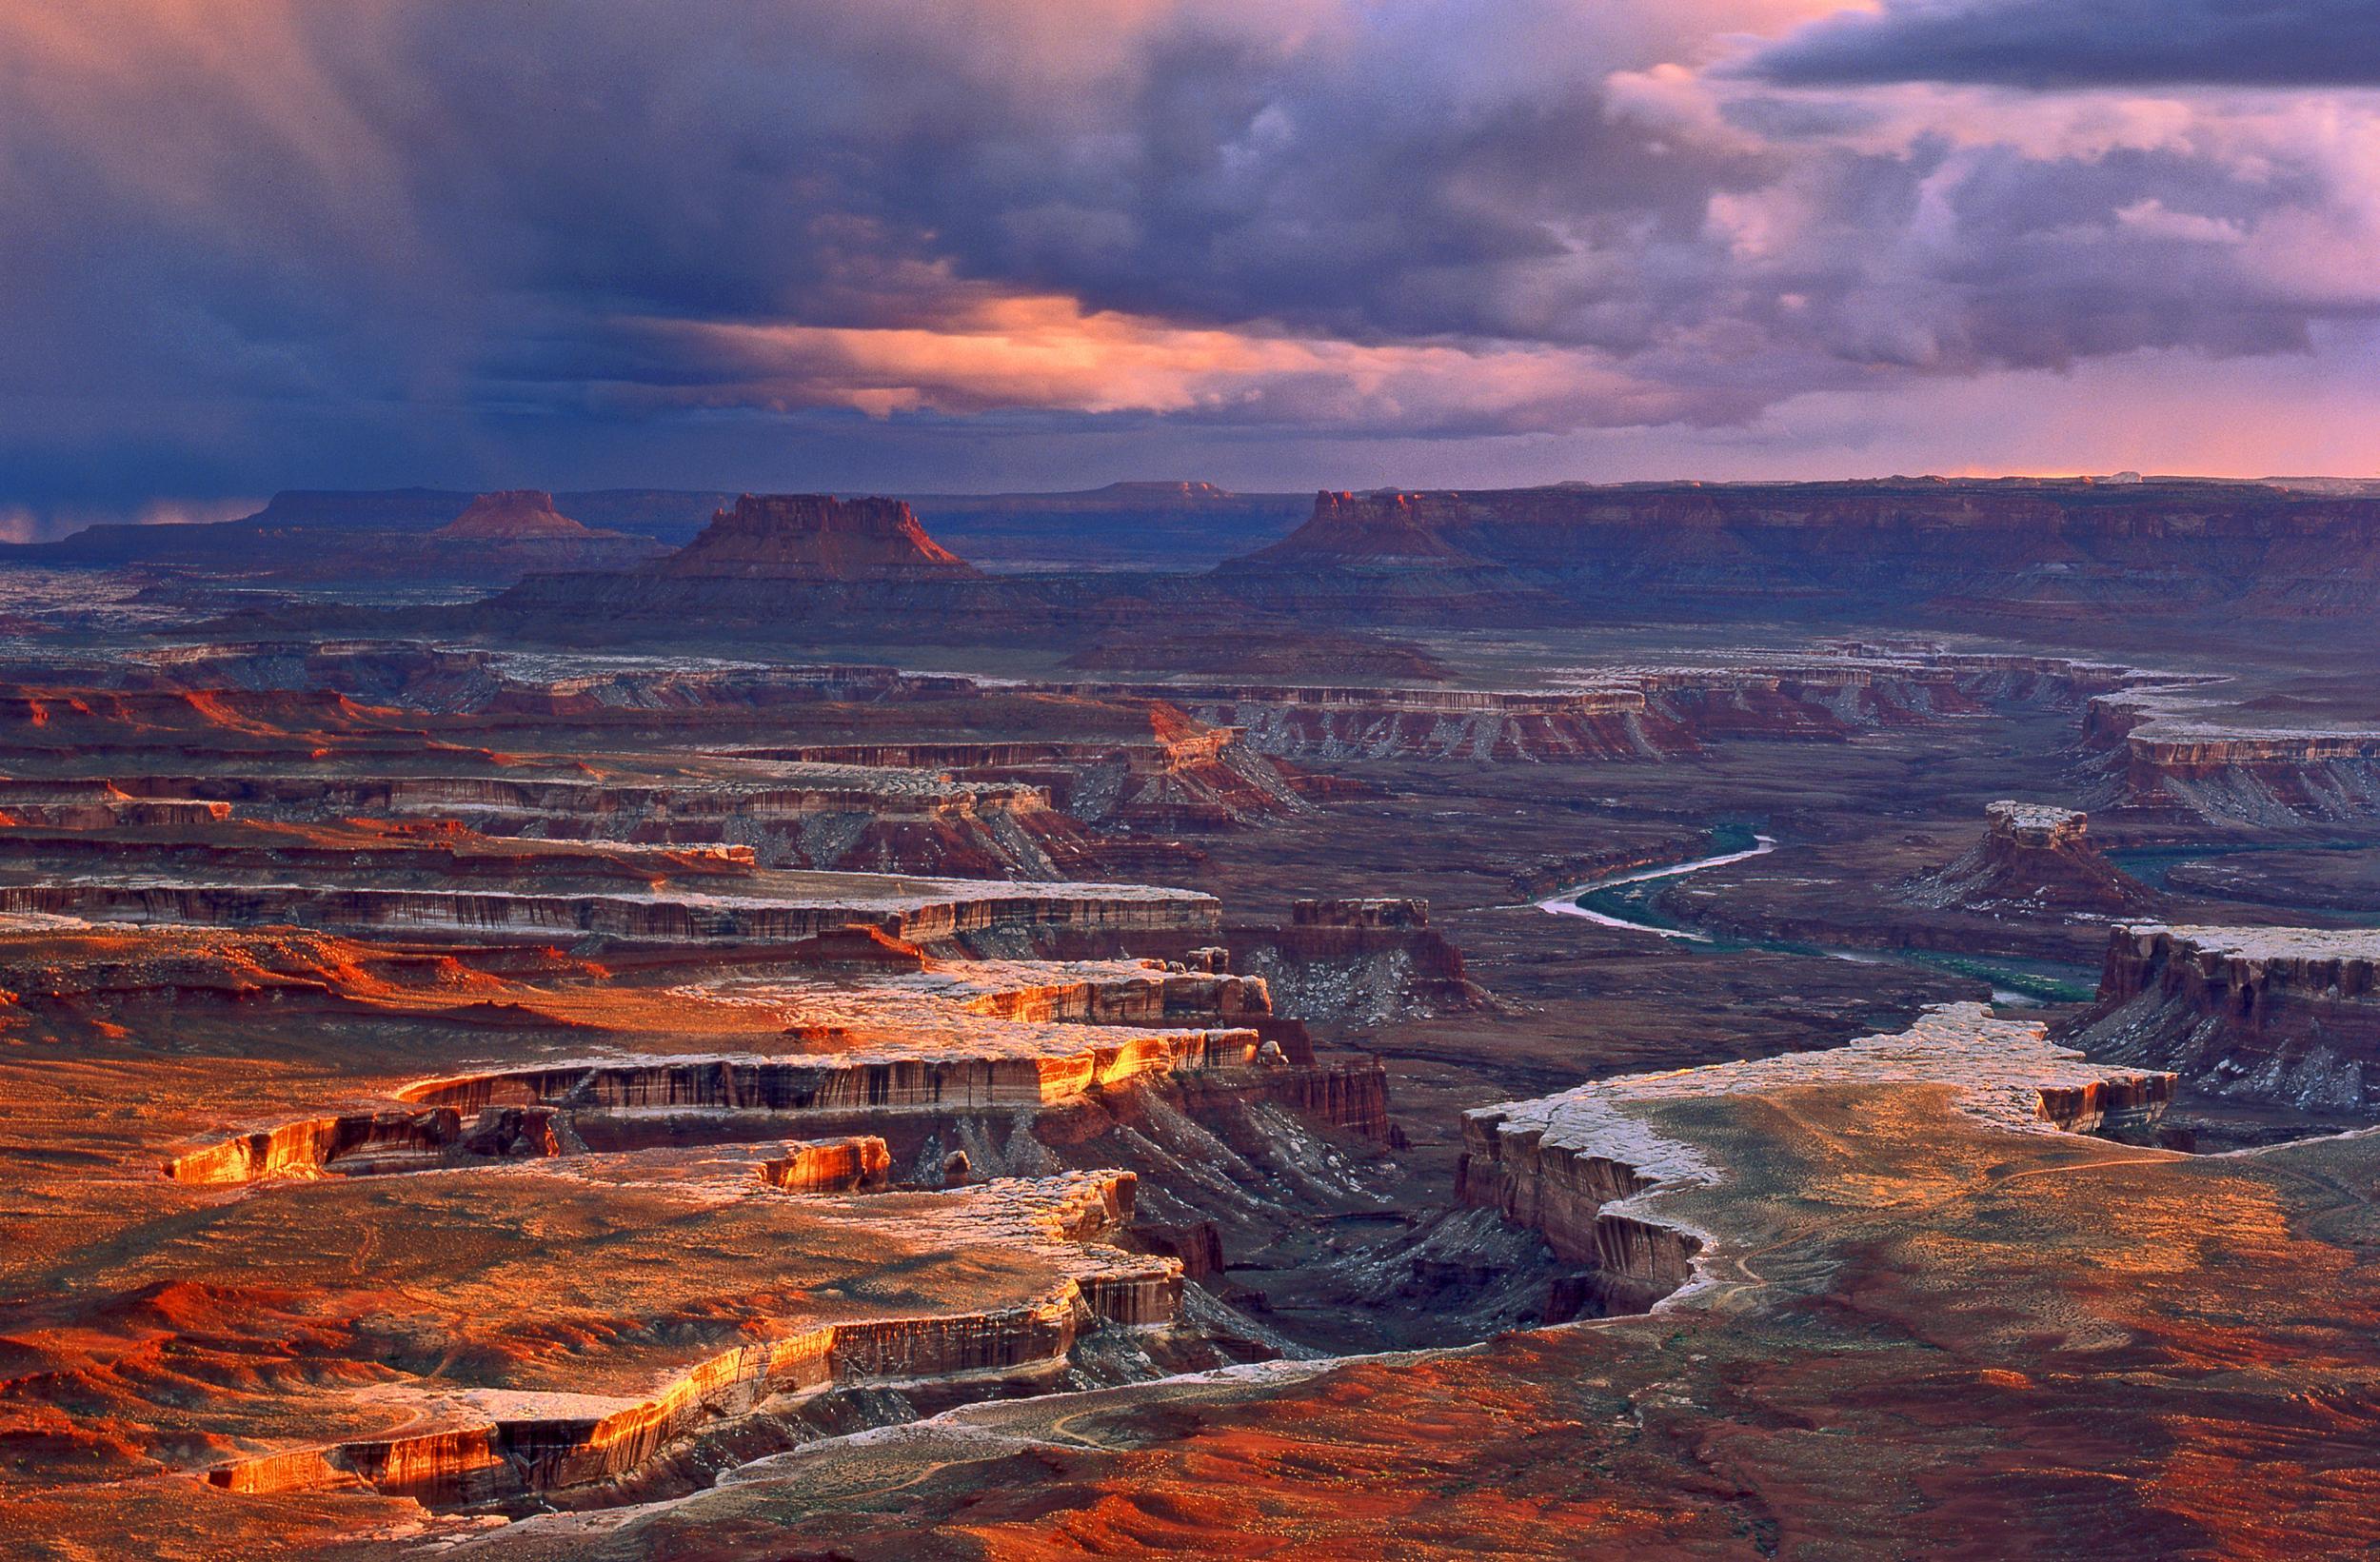 Utah's spectacular Canyonlands National Park, as seen from Green River Overlook